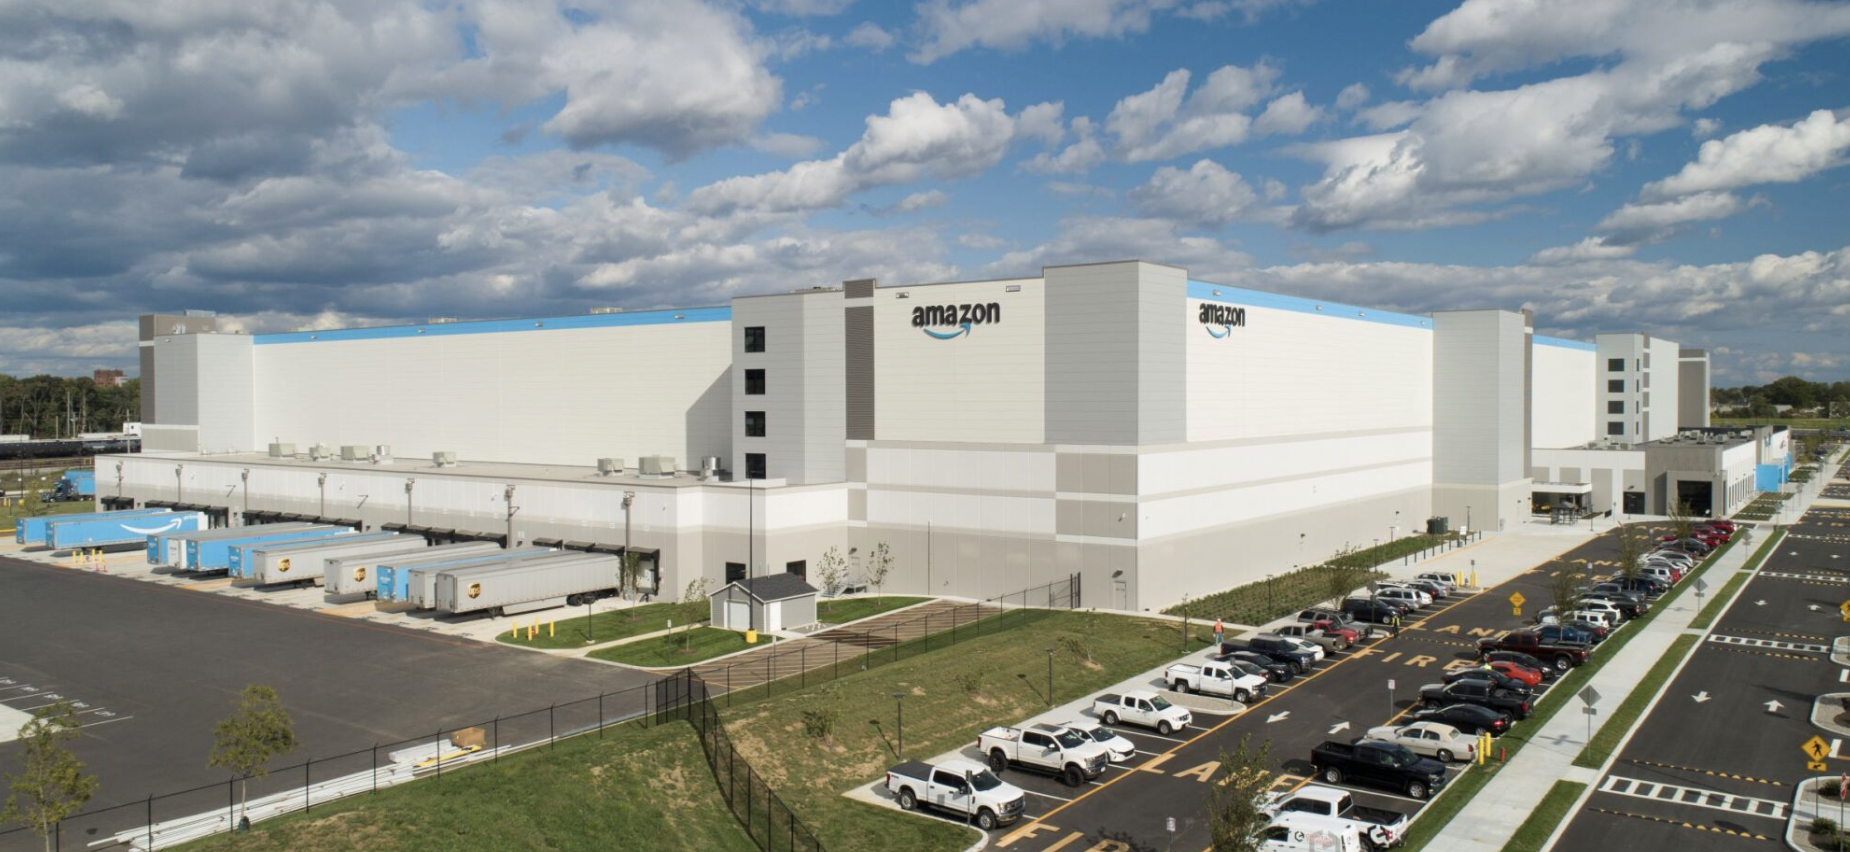 Amazon warehouse with full parking lot and trucks loading